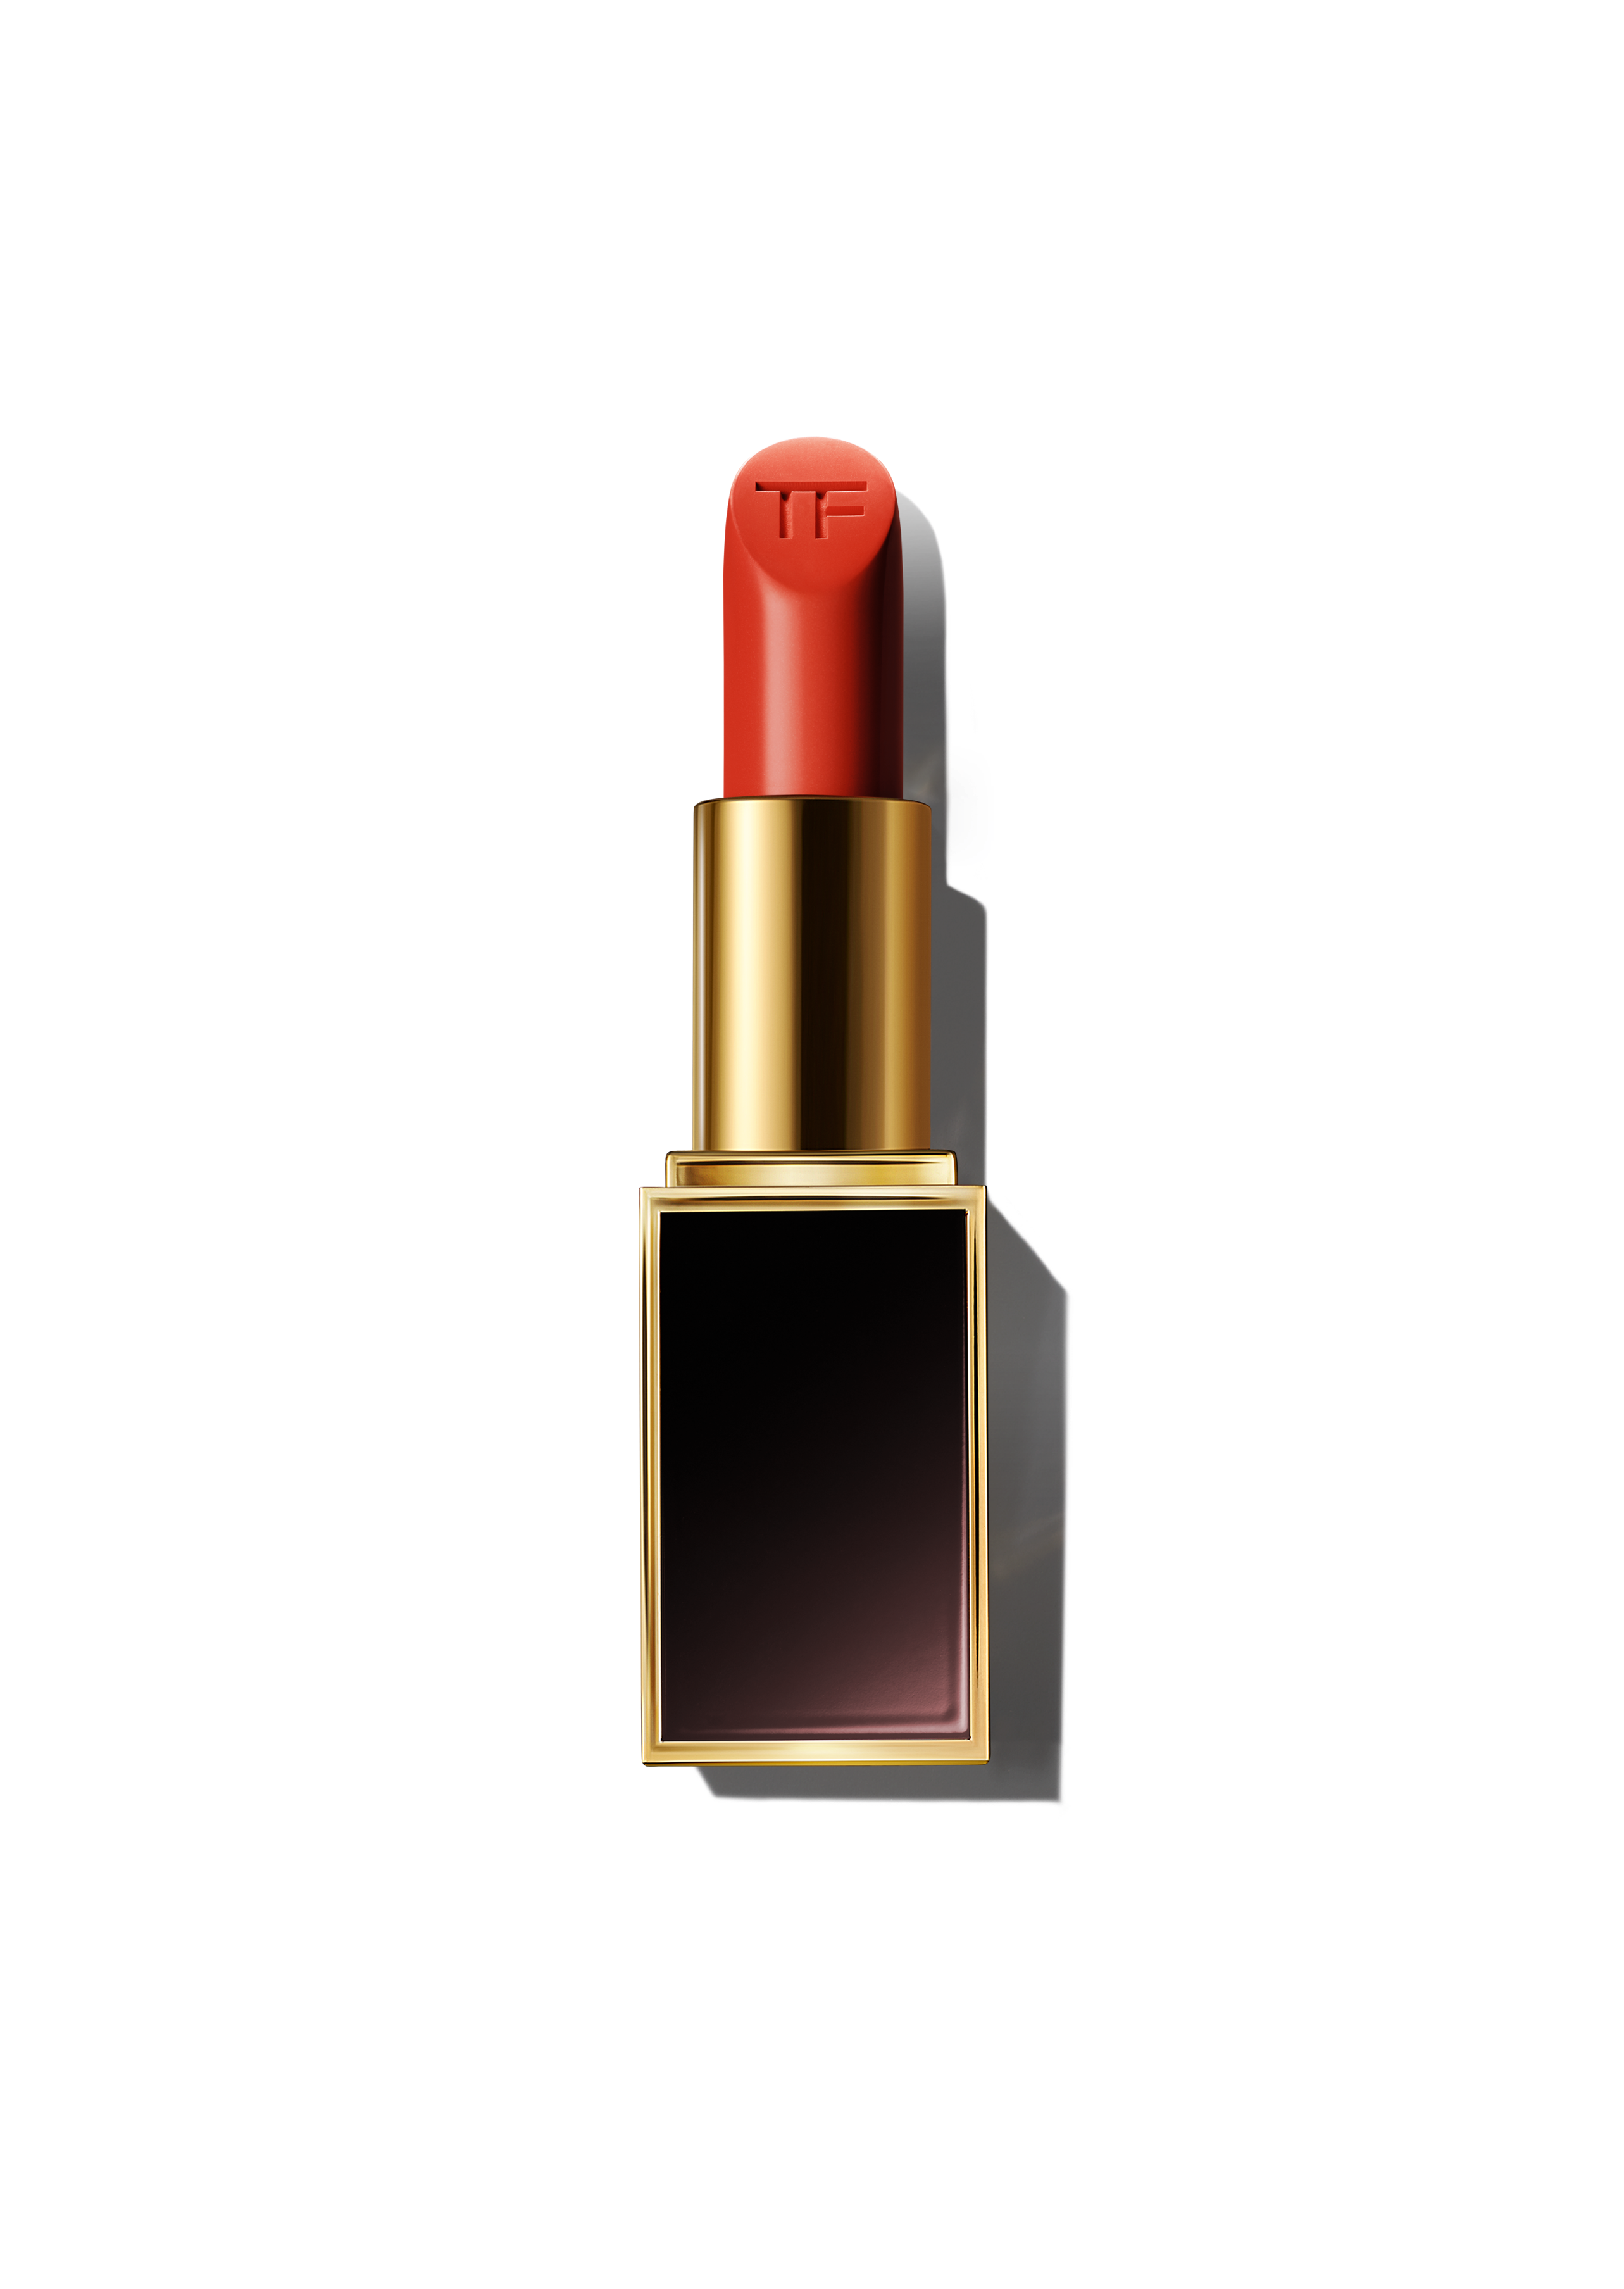 LIPS - Lips of TOM FORD 